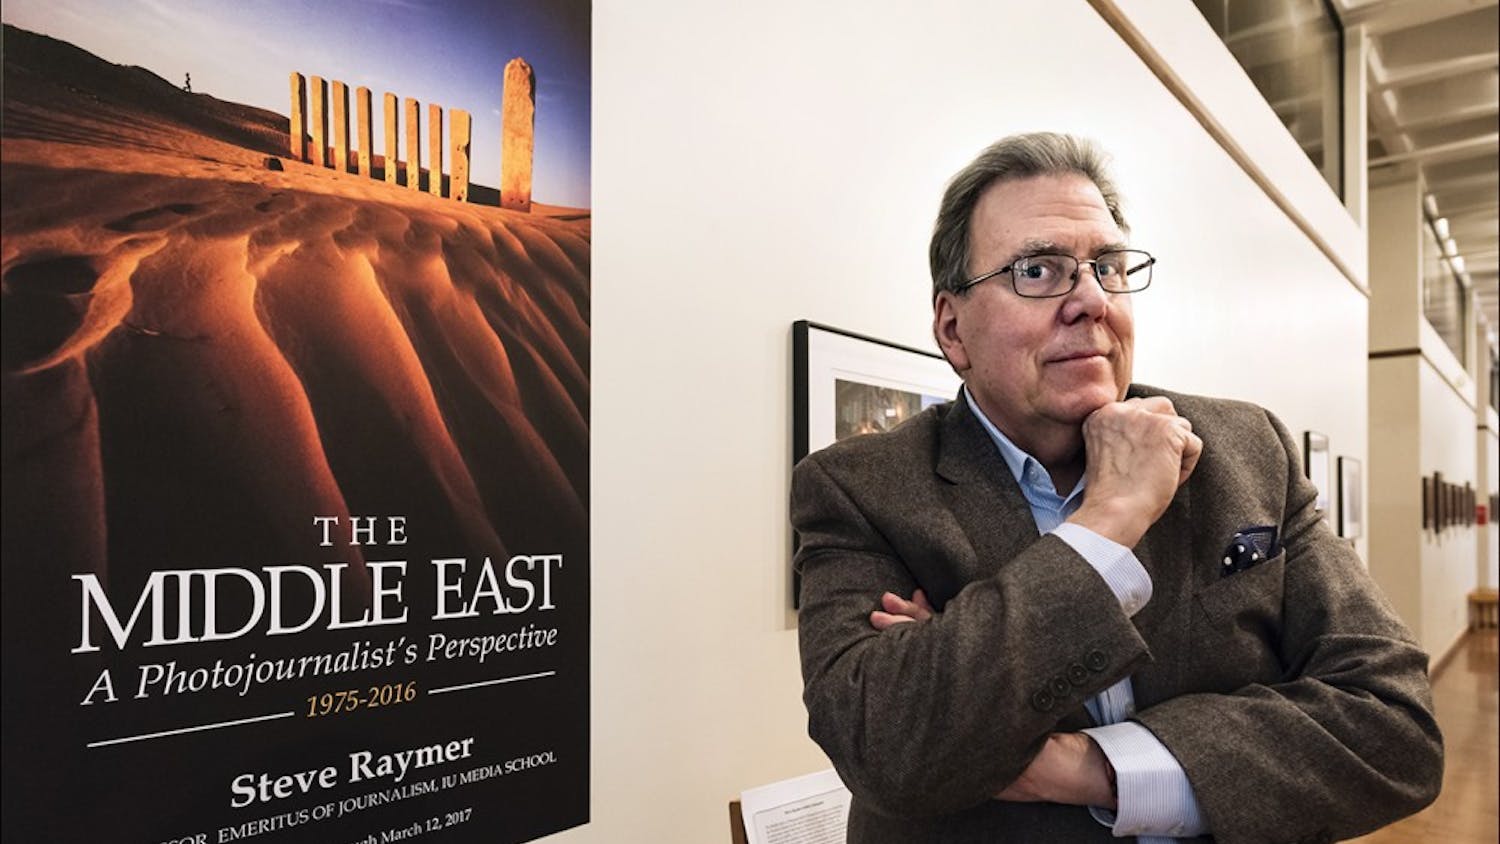 Professor Steve Raymer stands at the front of his exhibition, "The Middle East: A Photojournalist's Perspective," on view through March 12 at the Mathers Museum of World Cultures. The images are from Raymer's travels in the Middle East and depict a variety of countries, landscapes and cultural groups.